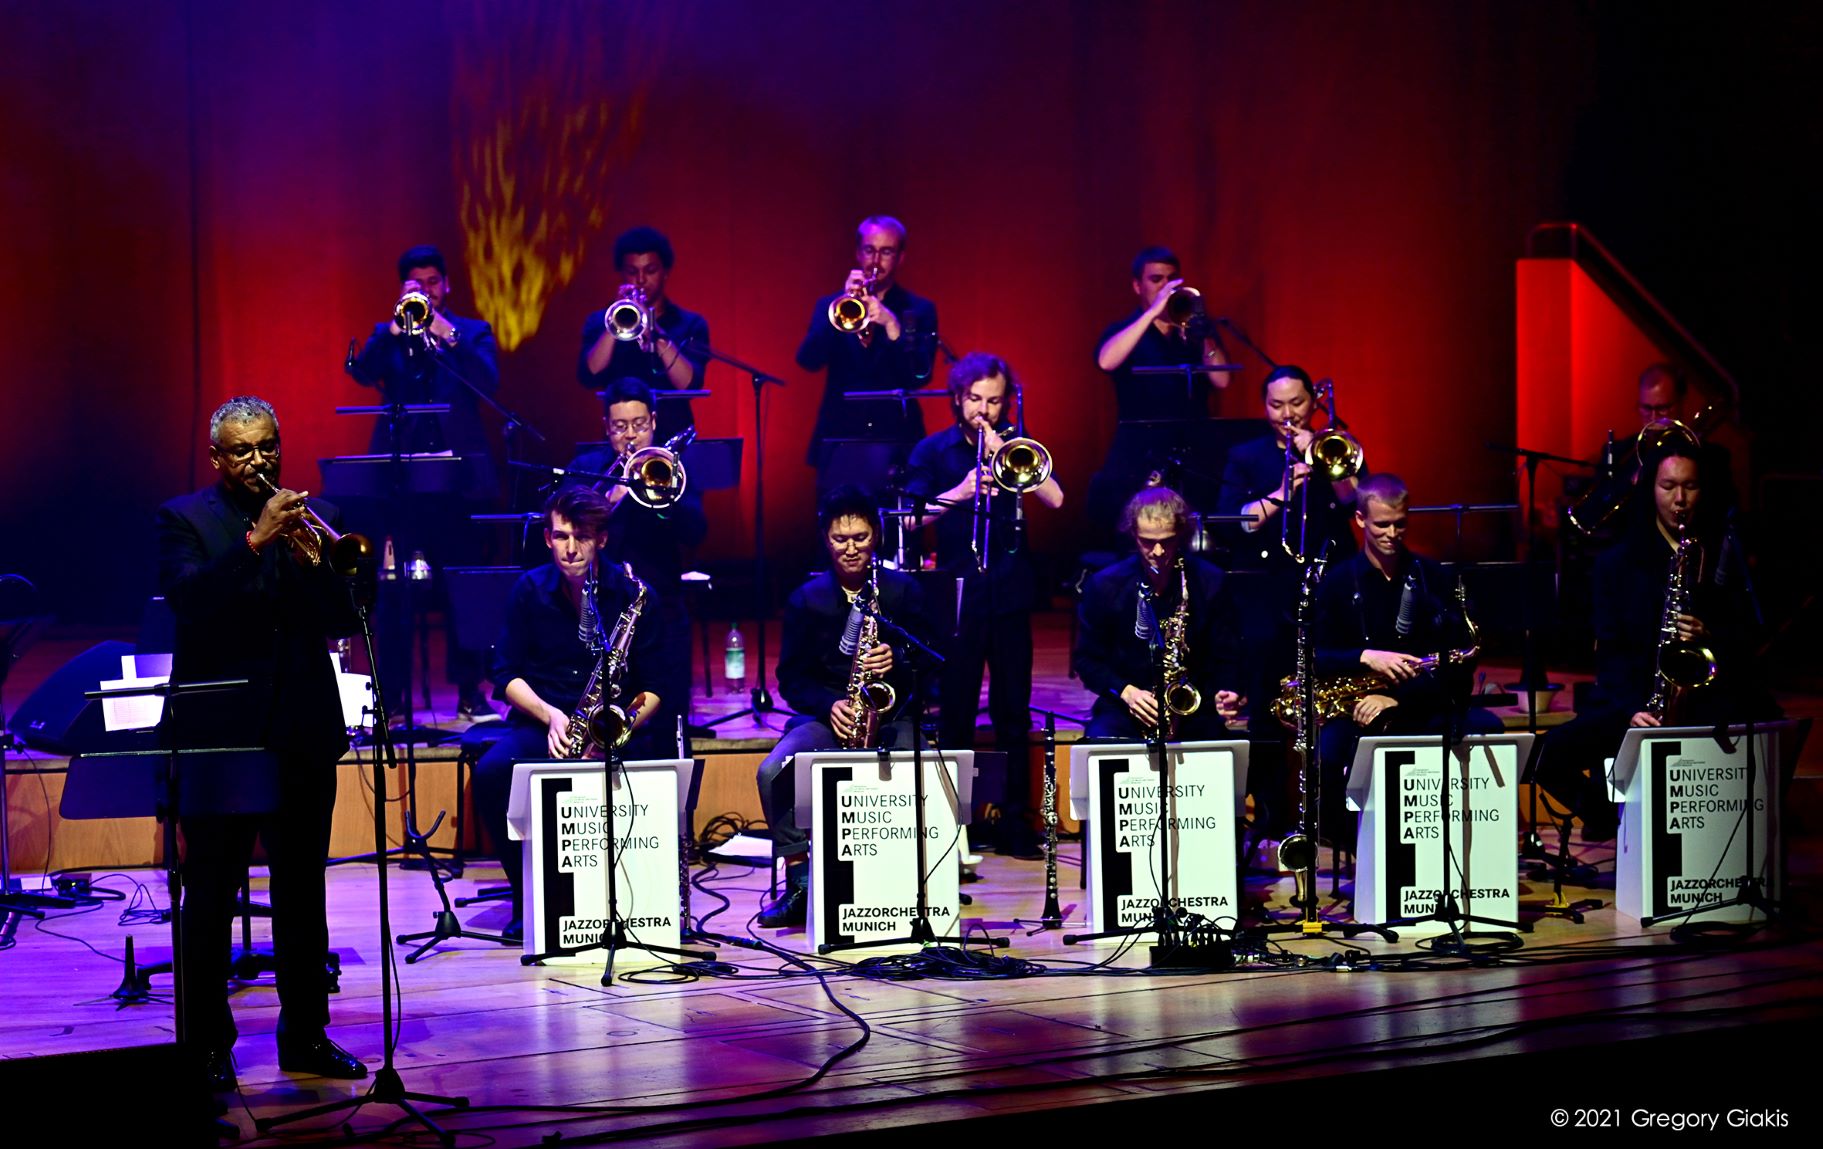 Brass ensemble on a red illuminated stage